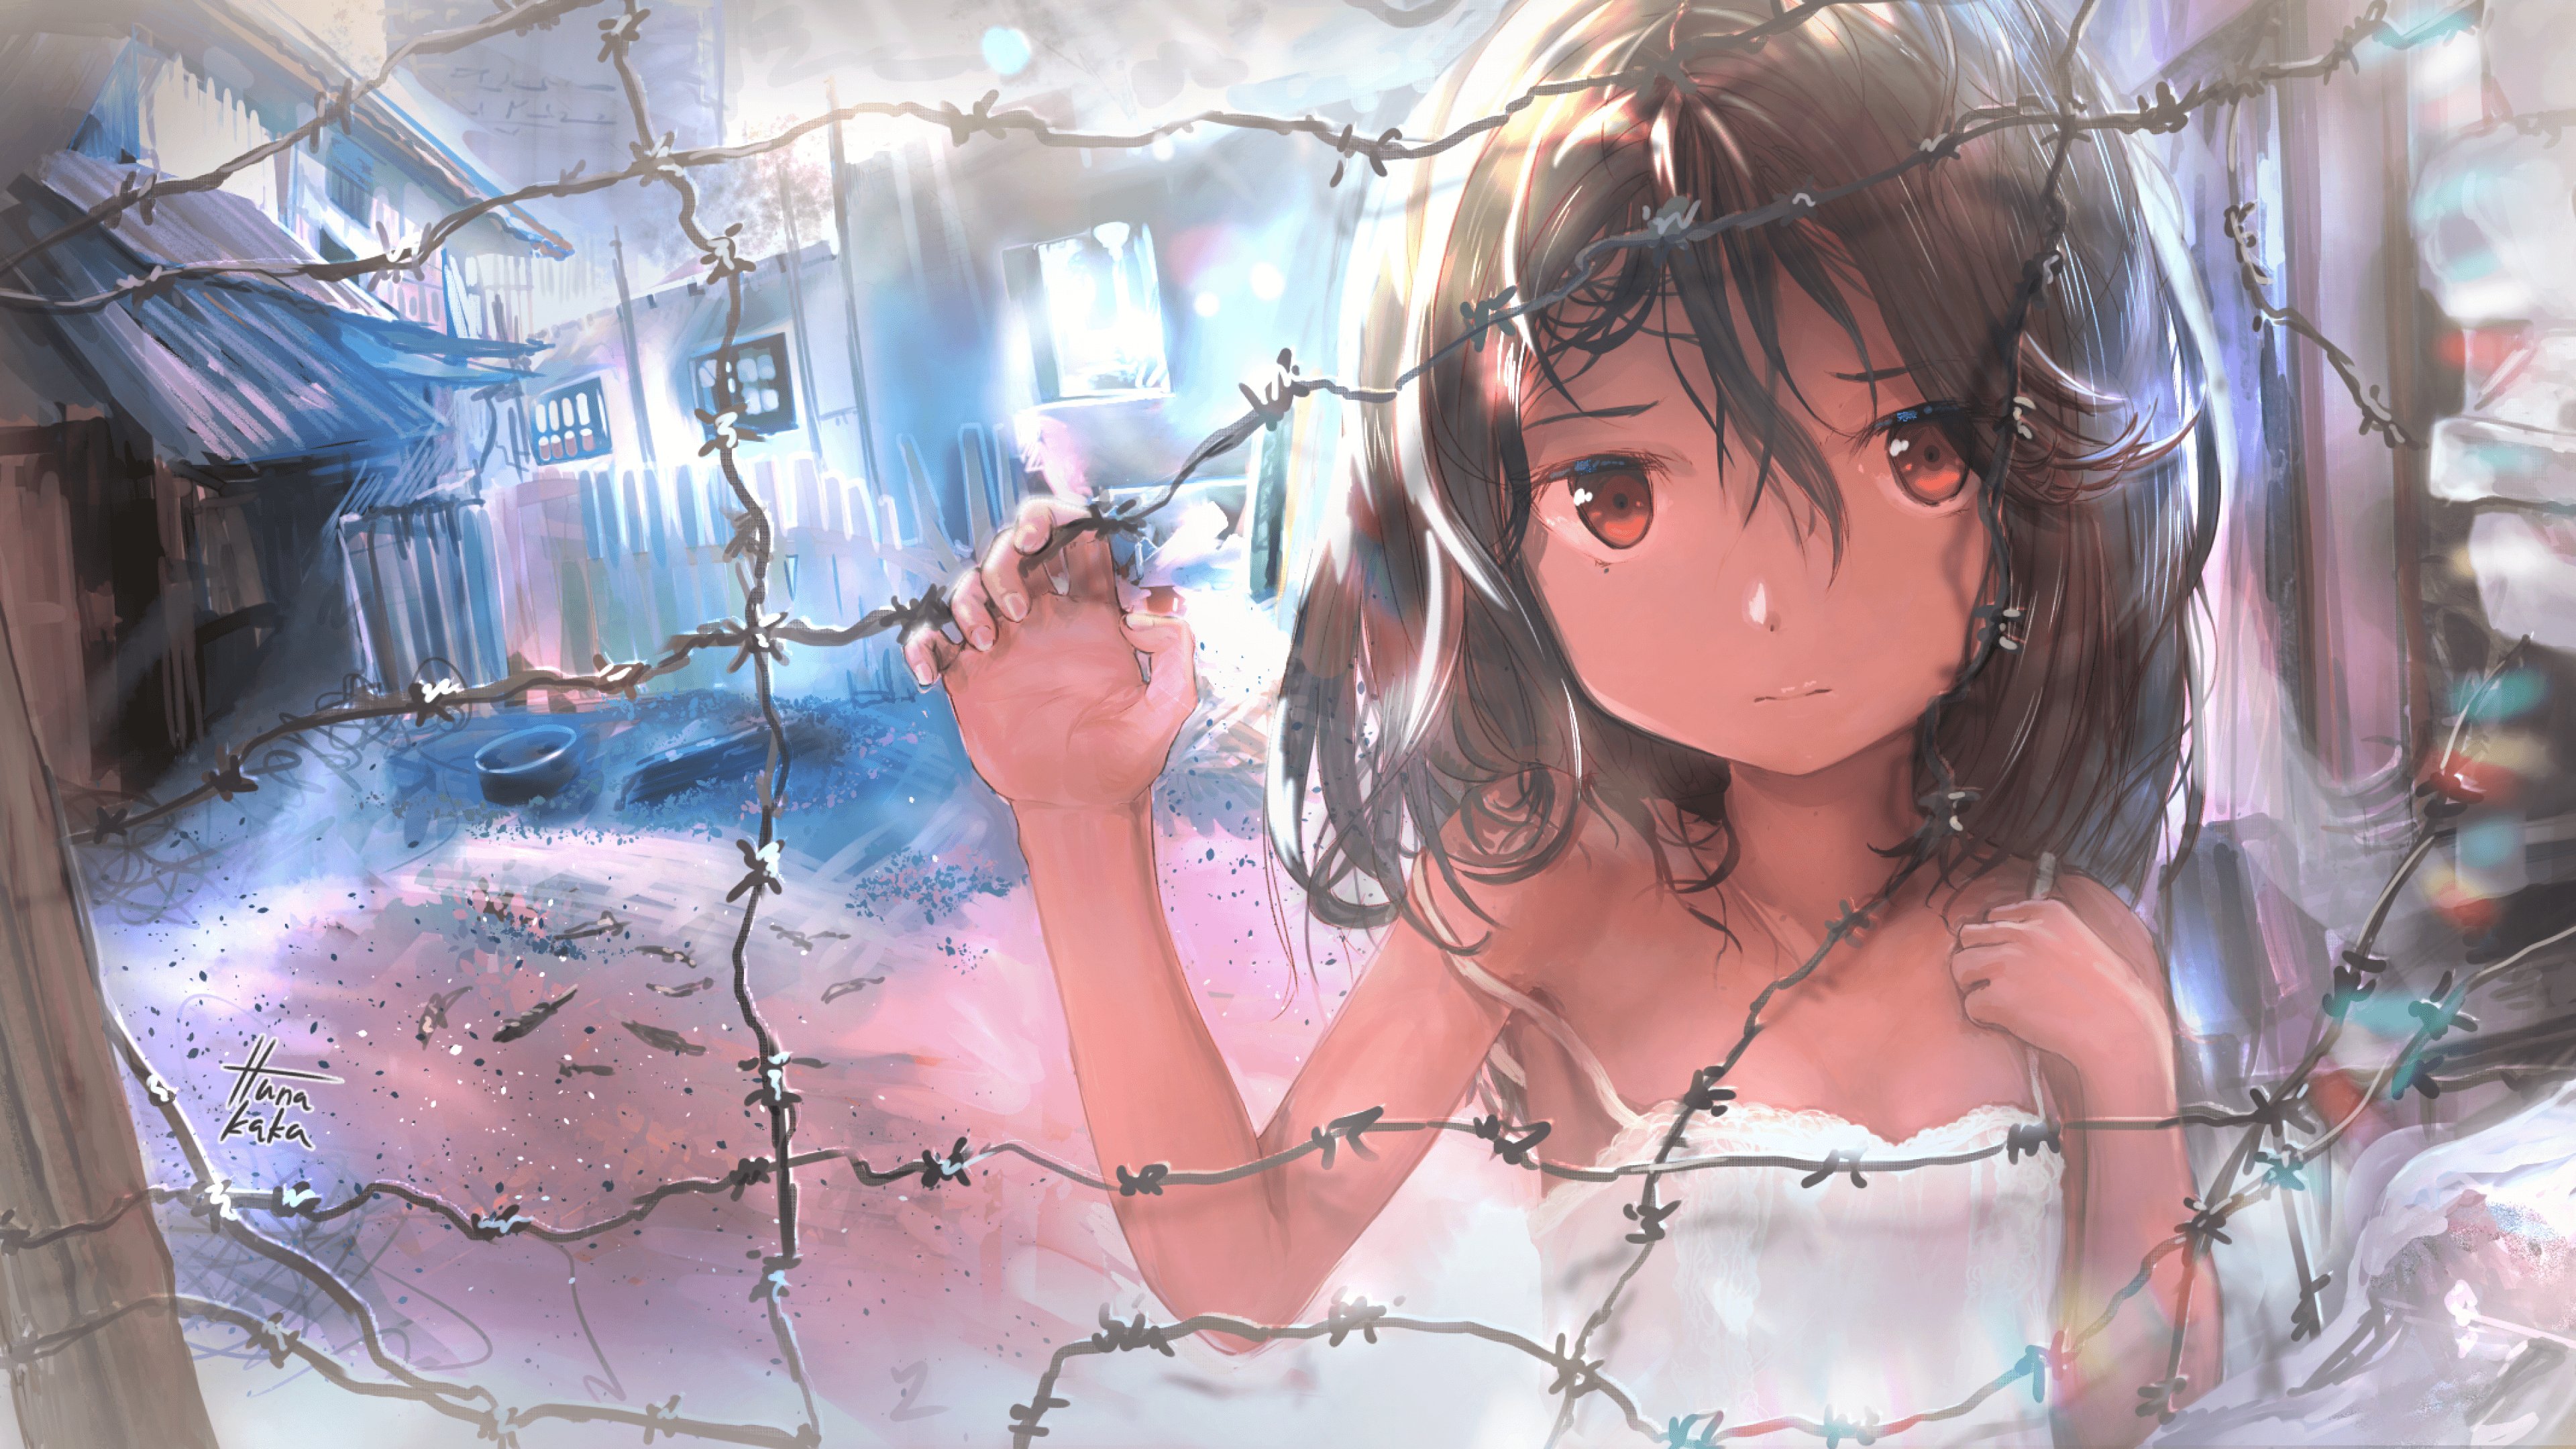 Download 3840x2160 Anime Girl, Fence, Sad Face, Poor Wallpaper